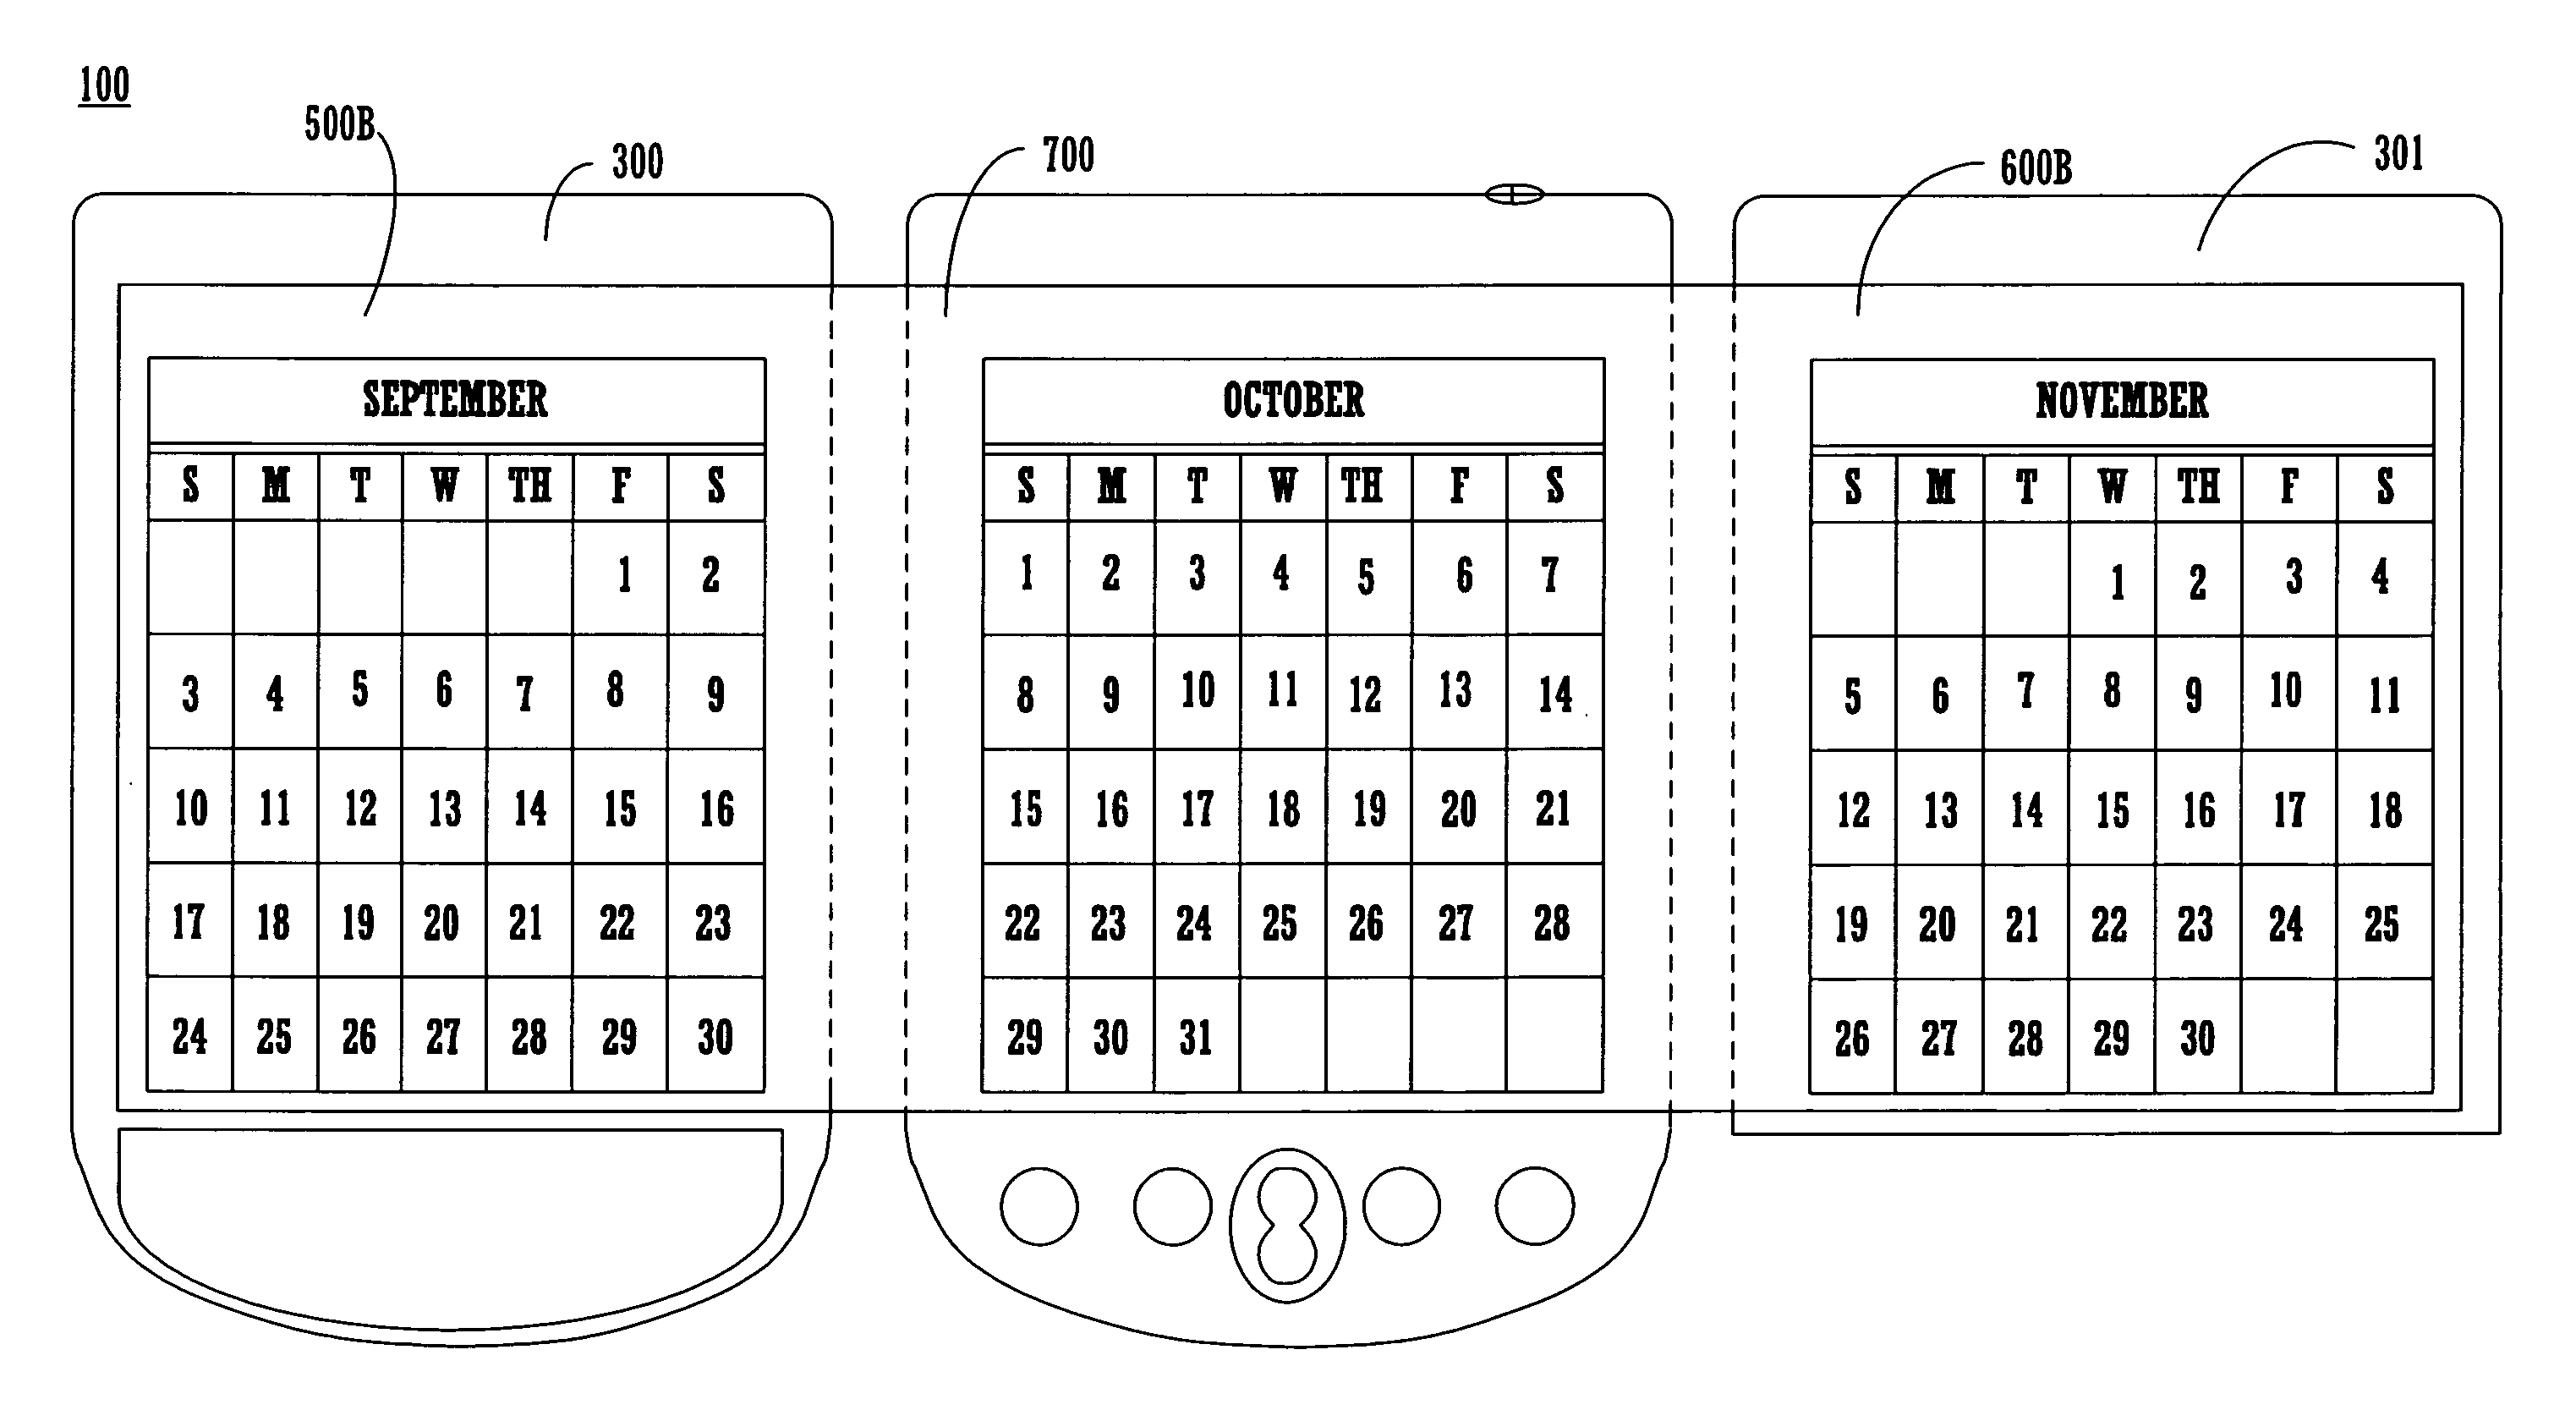 Multi-sided display for portable computer